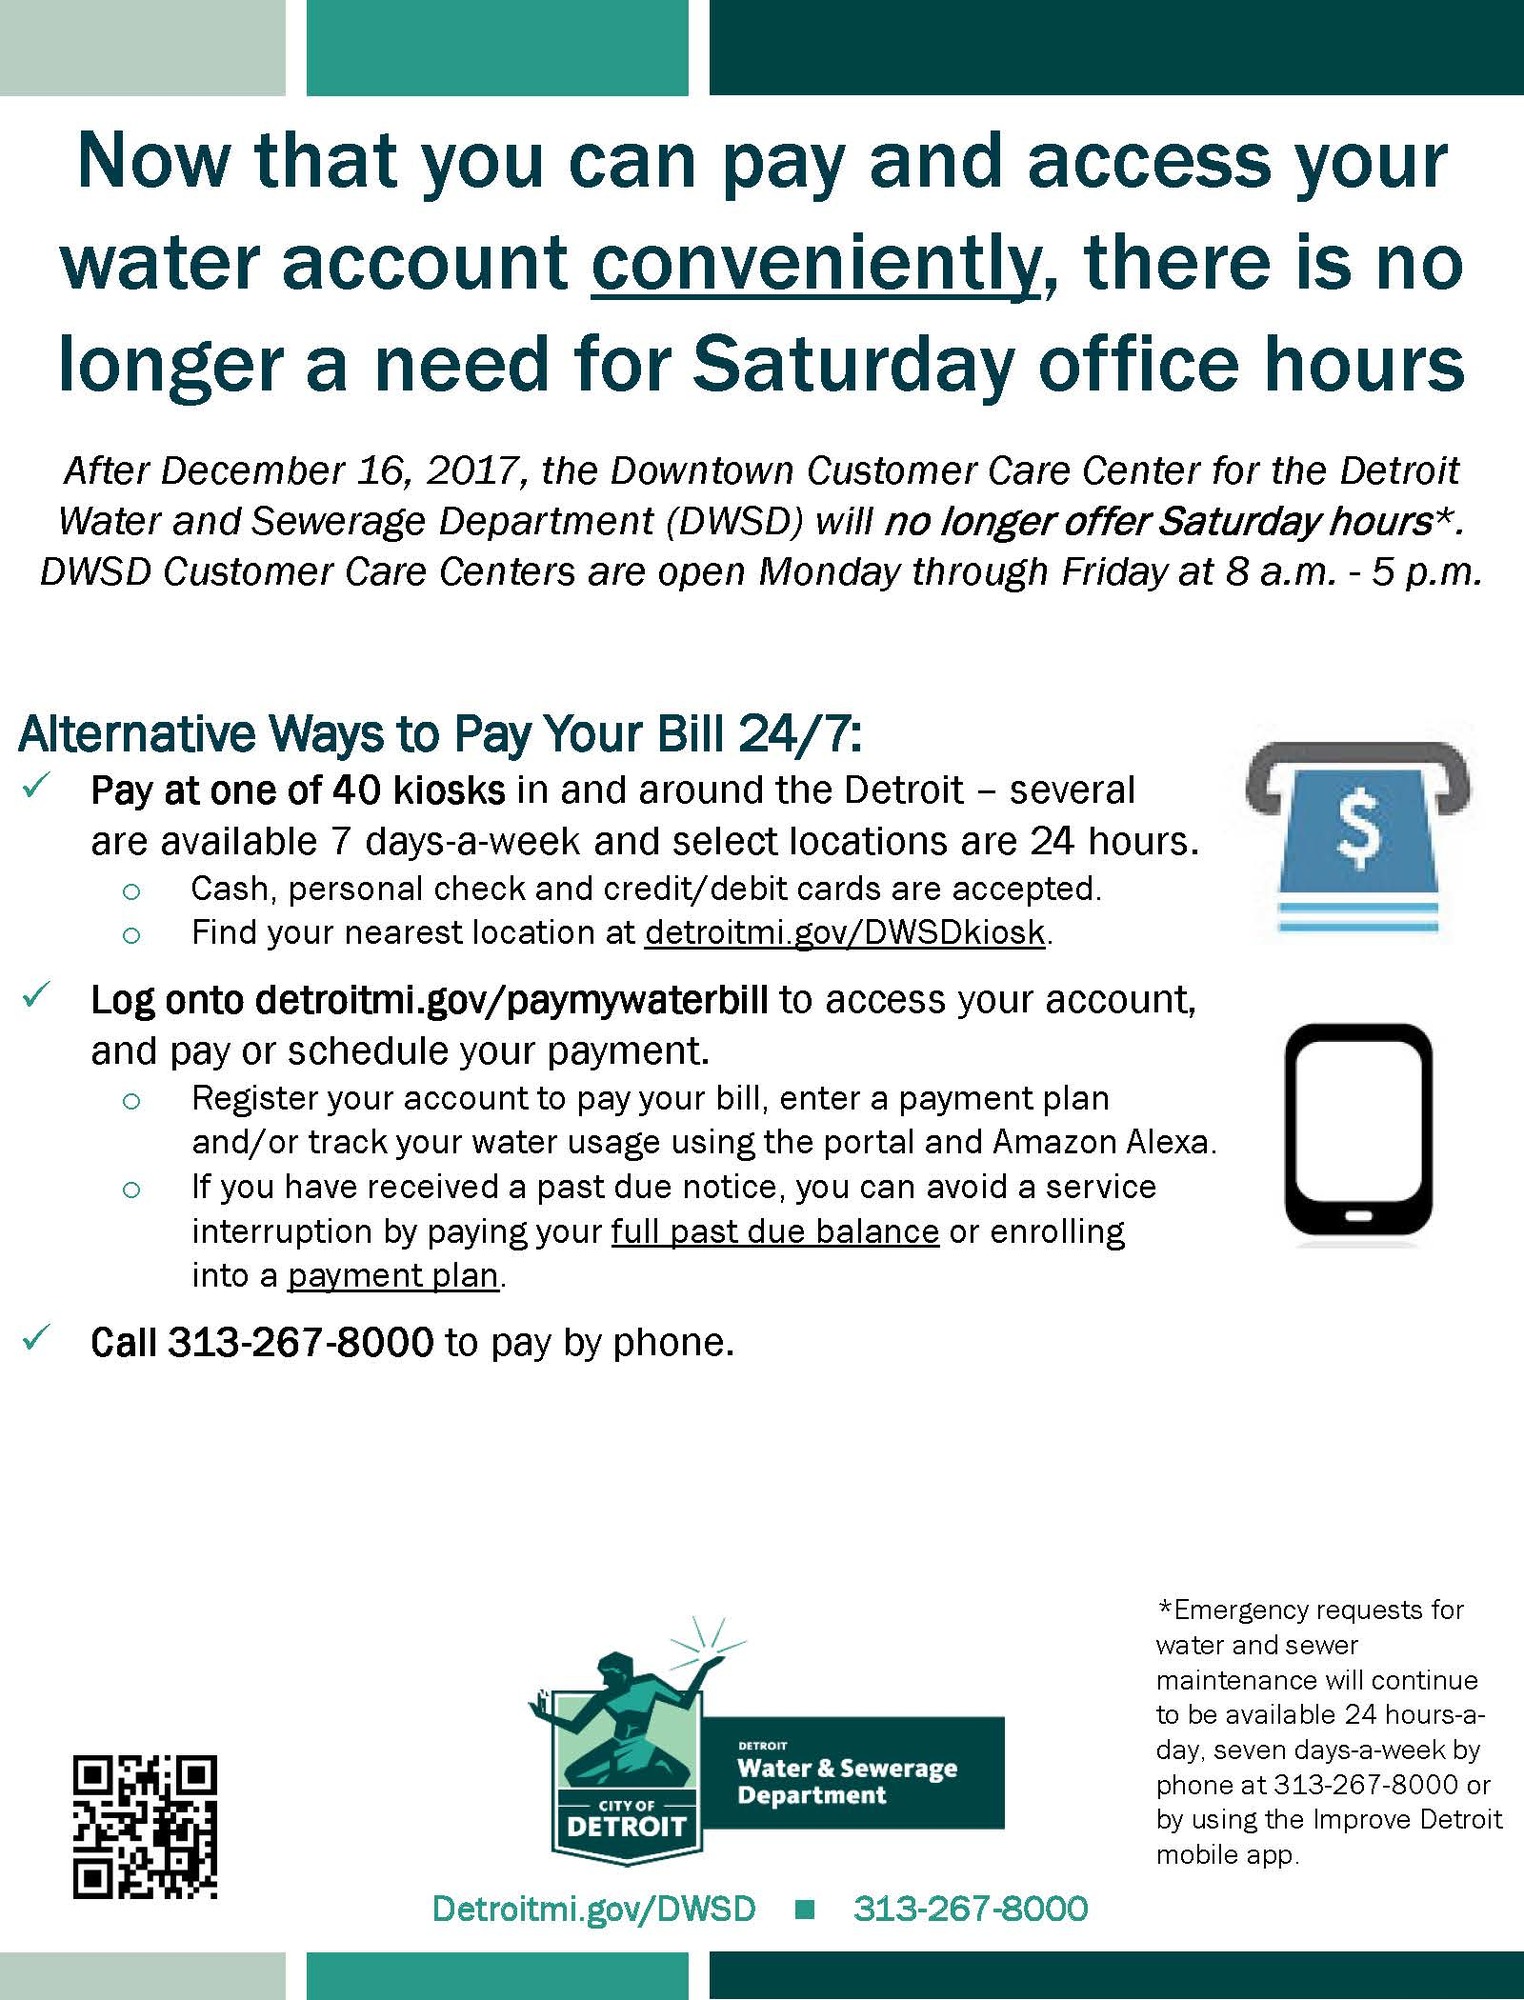 Now that you can pay and access your water account conveniently, there is no longer a need for Saturday office hours